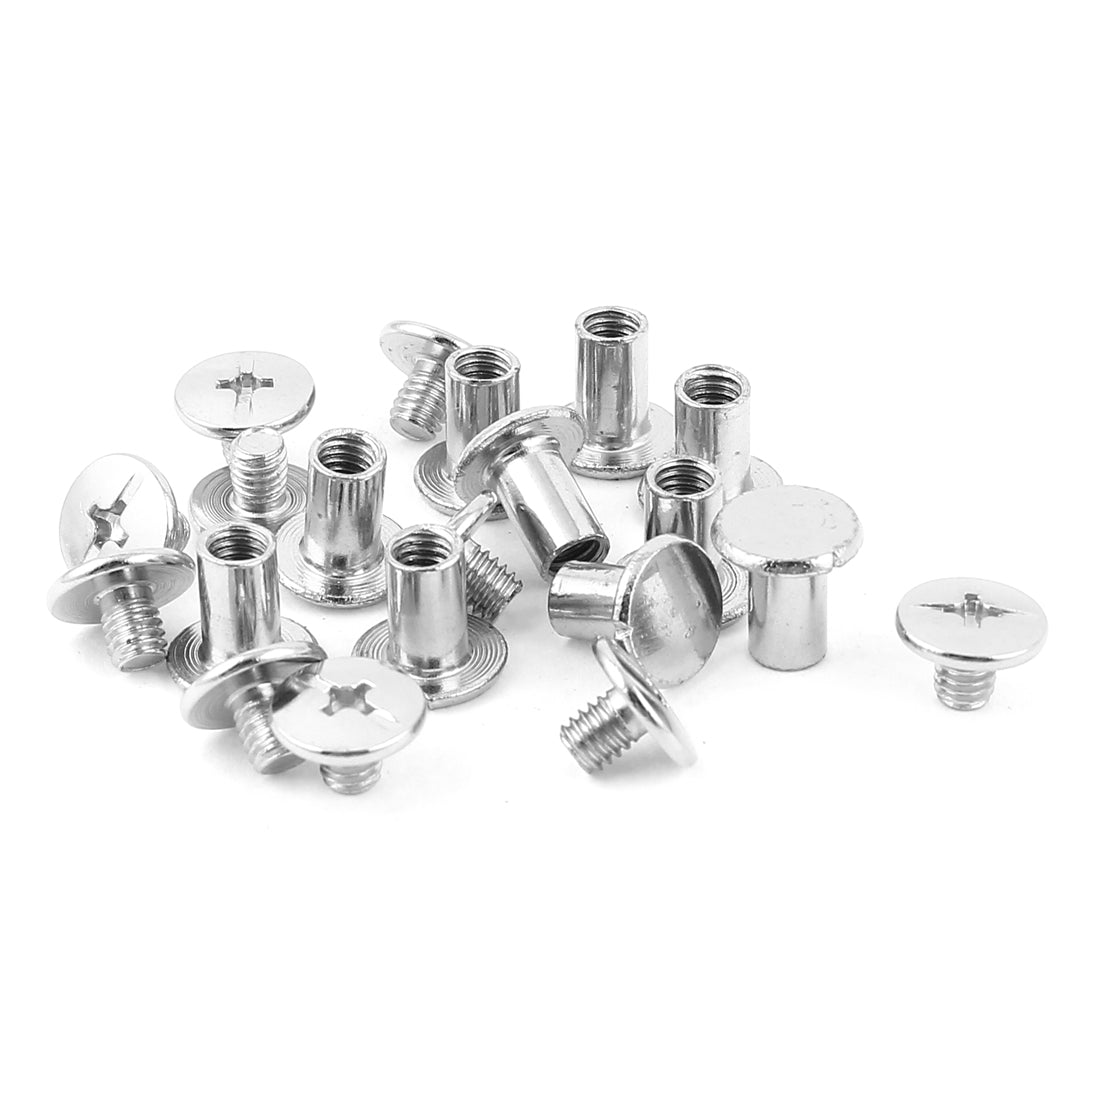 uxcell Uxcell 10pcs 5mmx8mm Nickel Plated Binding Chicago Screw Post for Album Scrapbook